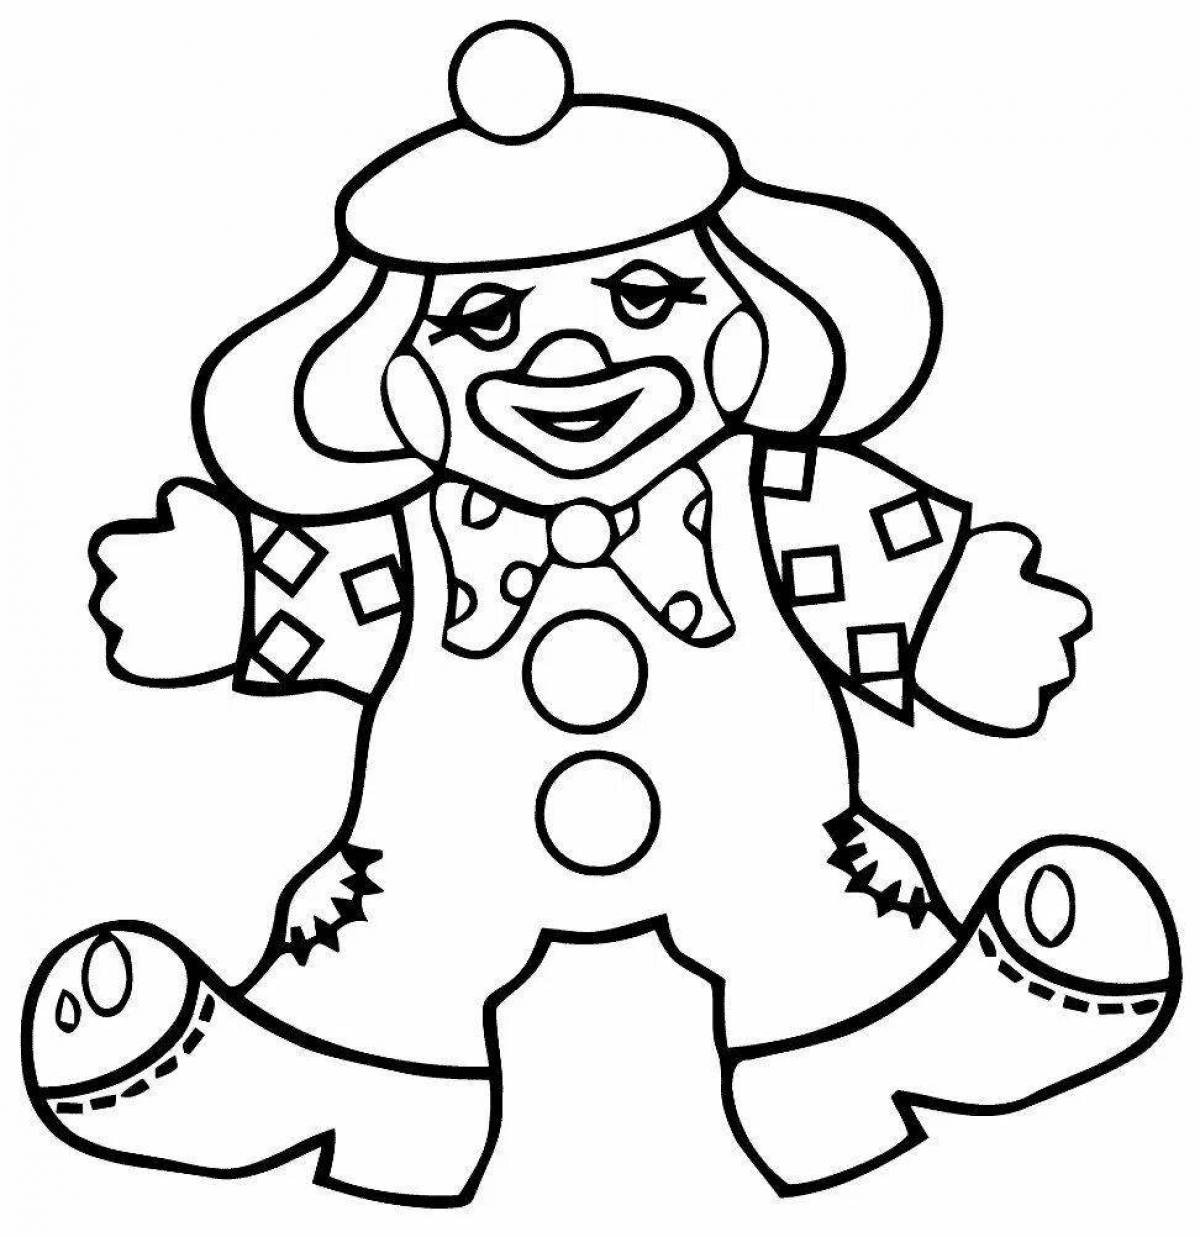 Energetic jester coloring pages for kids